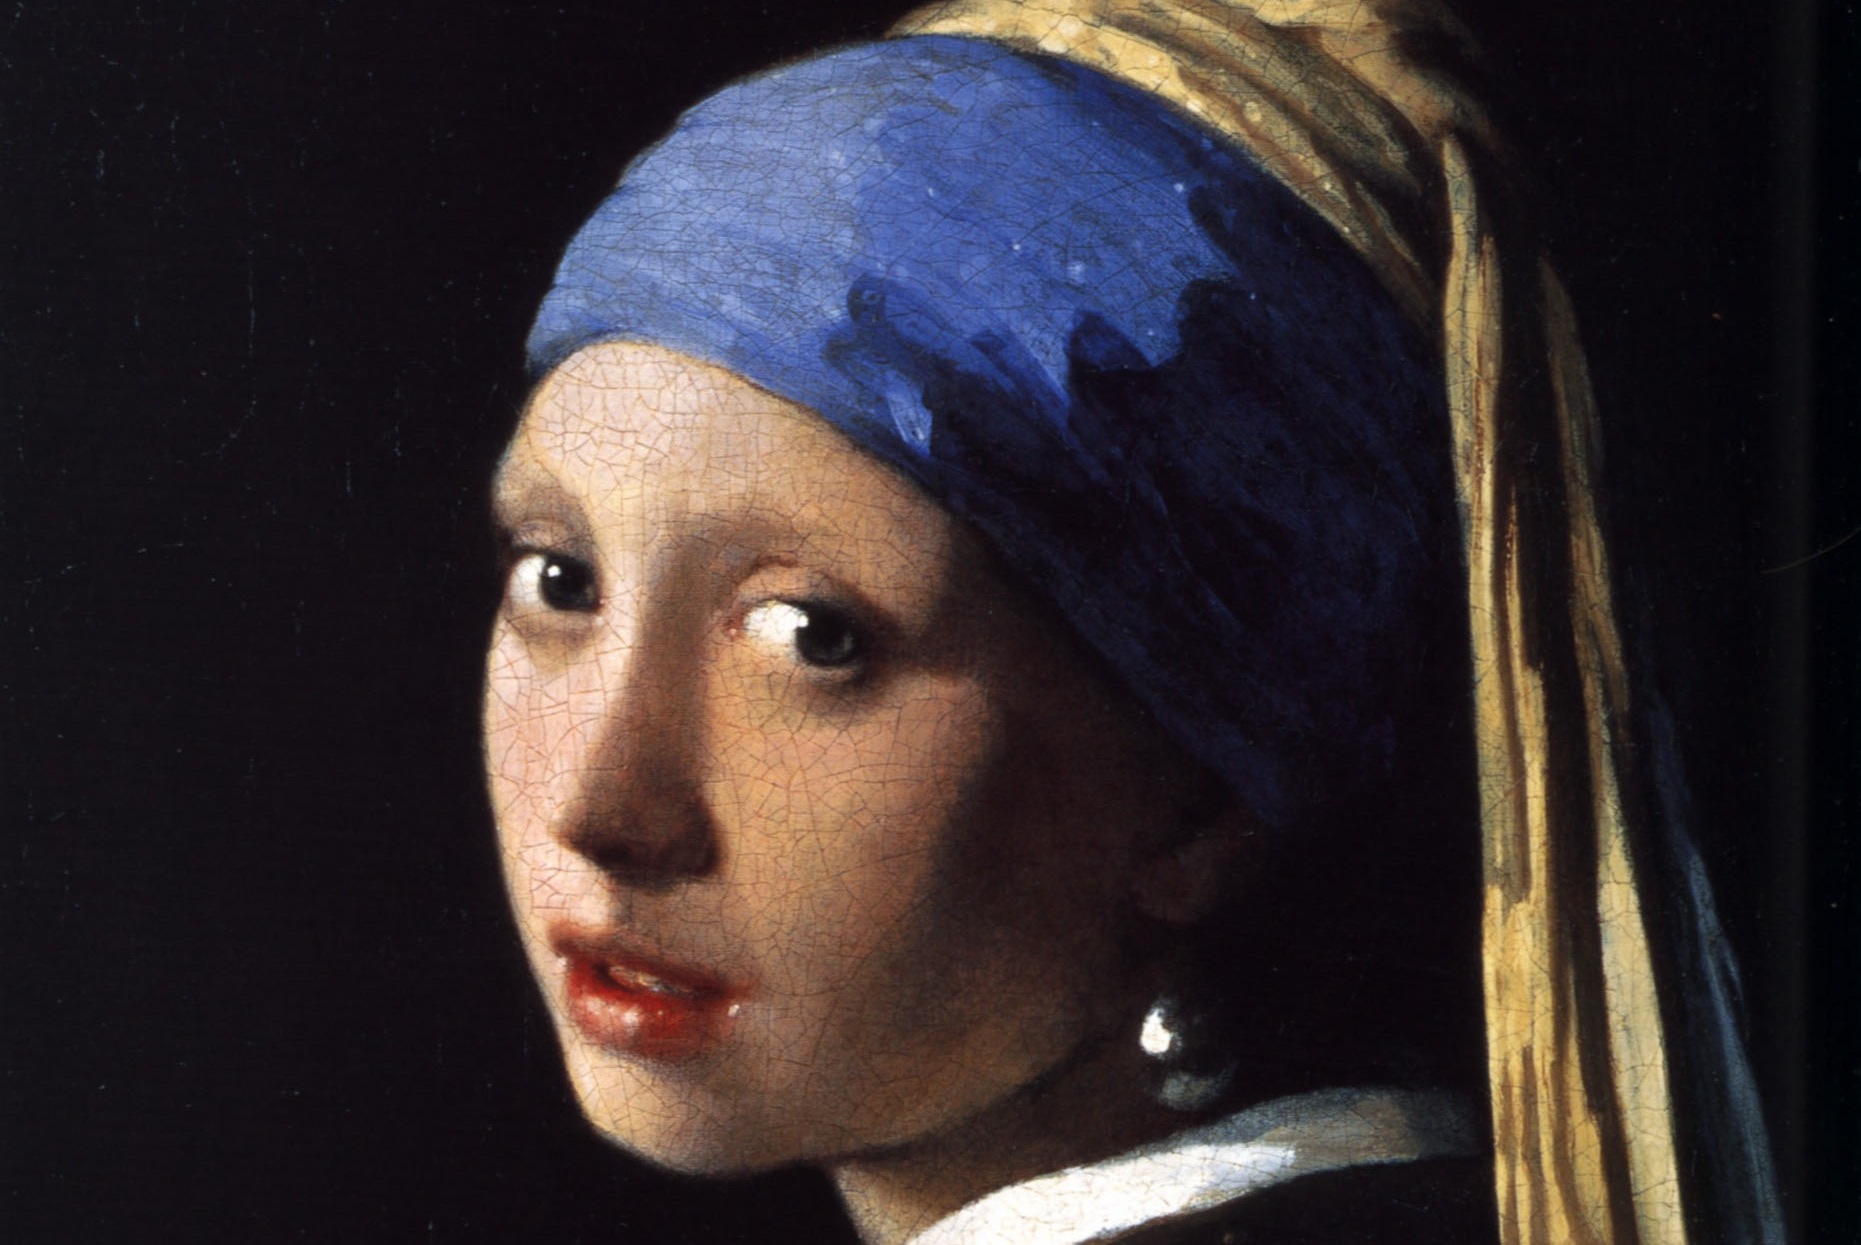 Johannes_Vermeer_1632-1675_-_The_Girl_With_The_Pearl_Earring_16651